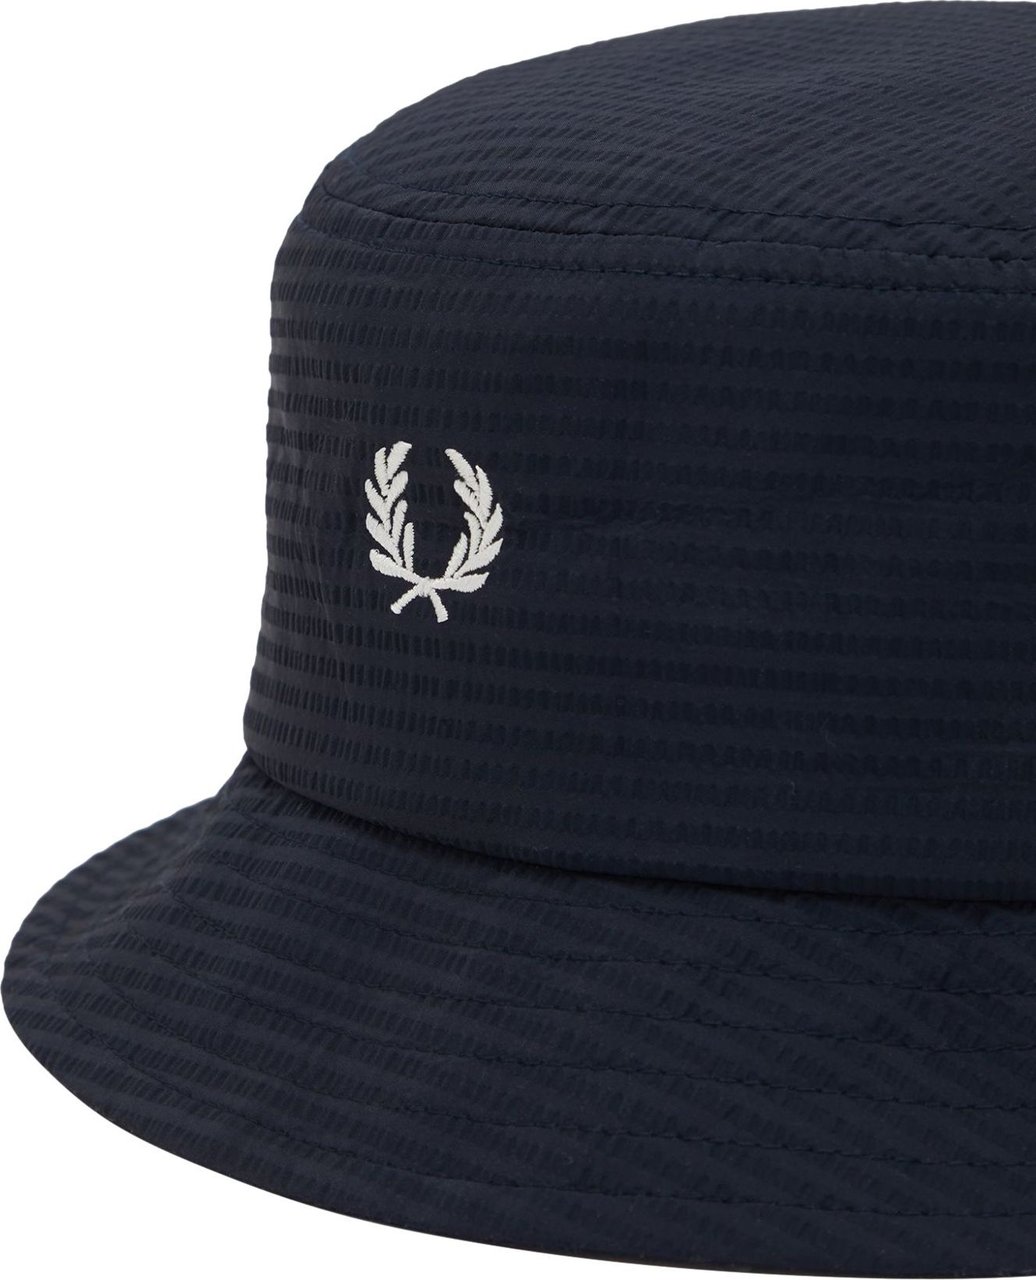 Fred Perry Hats Blue Blauw